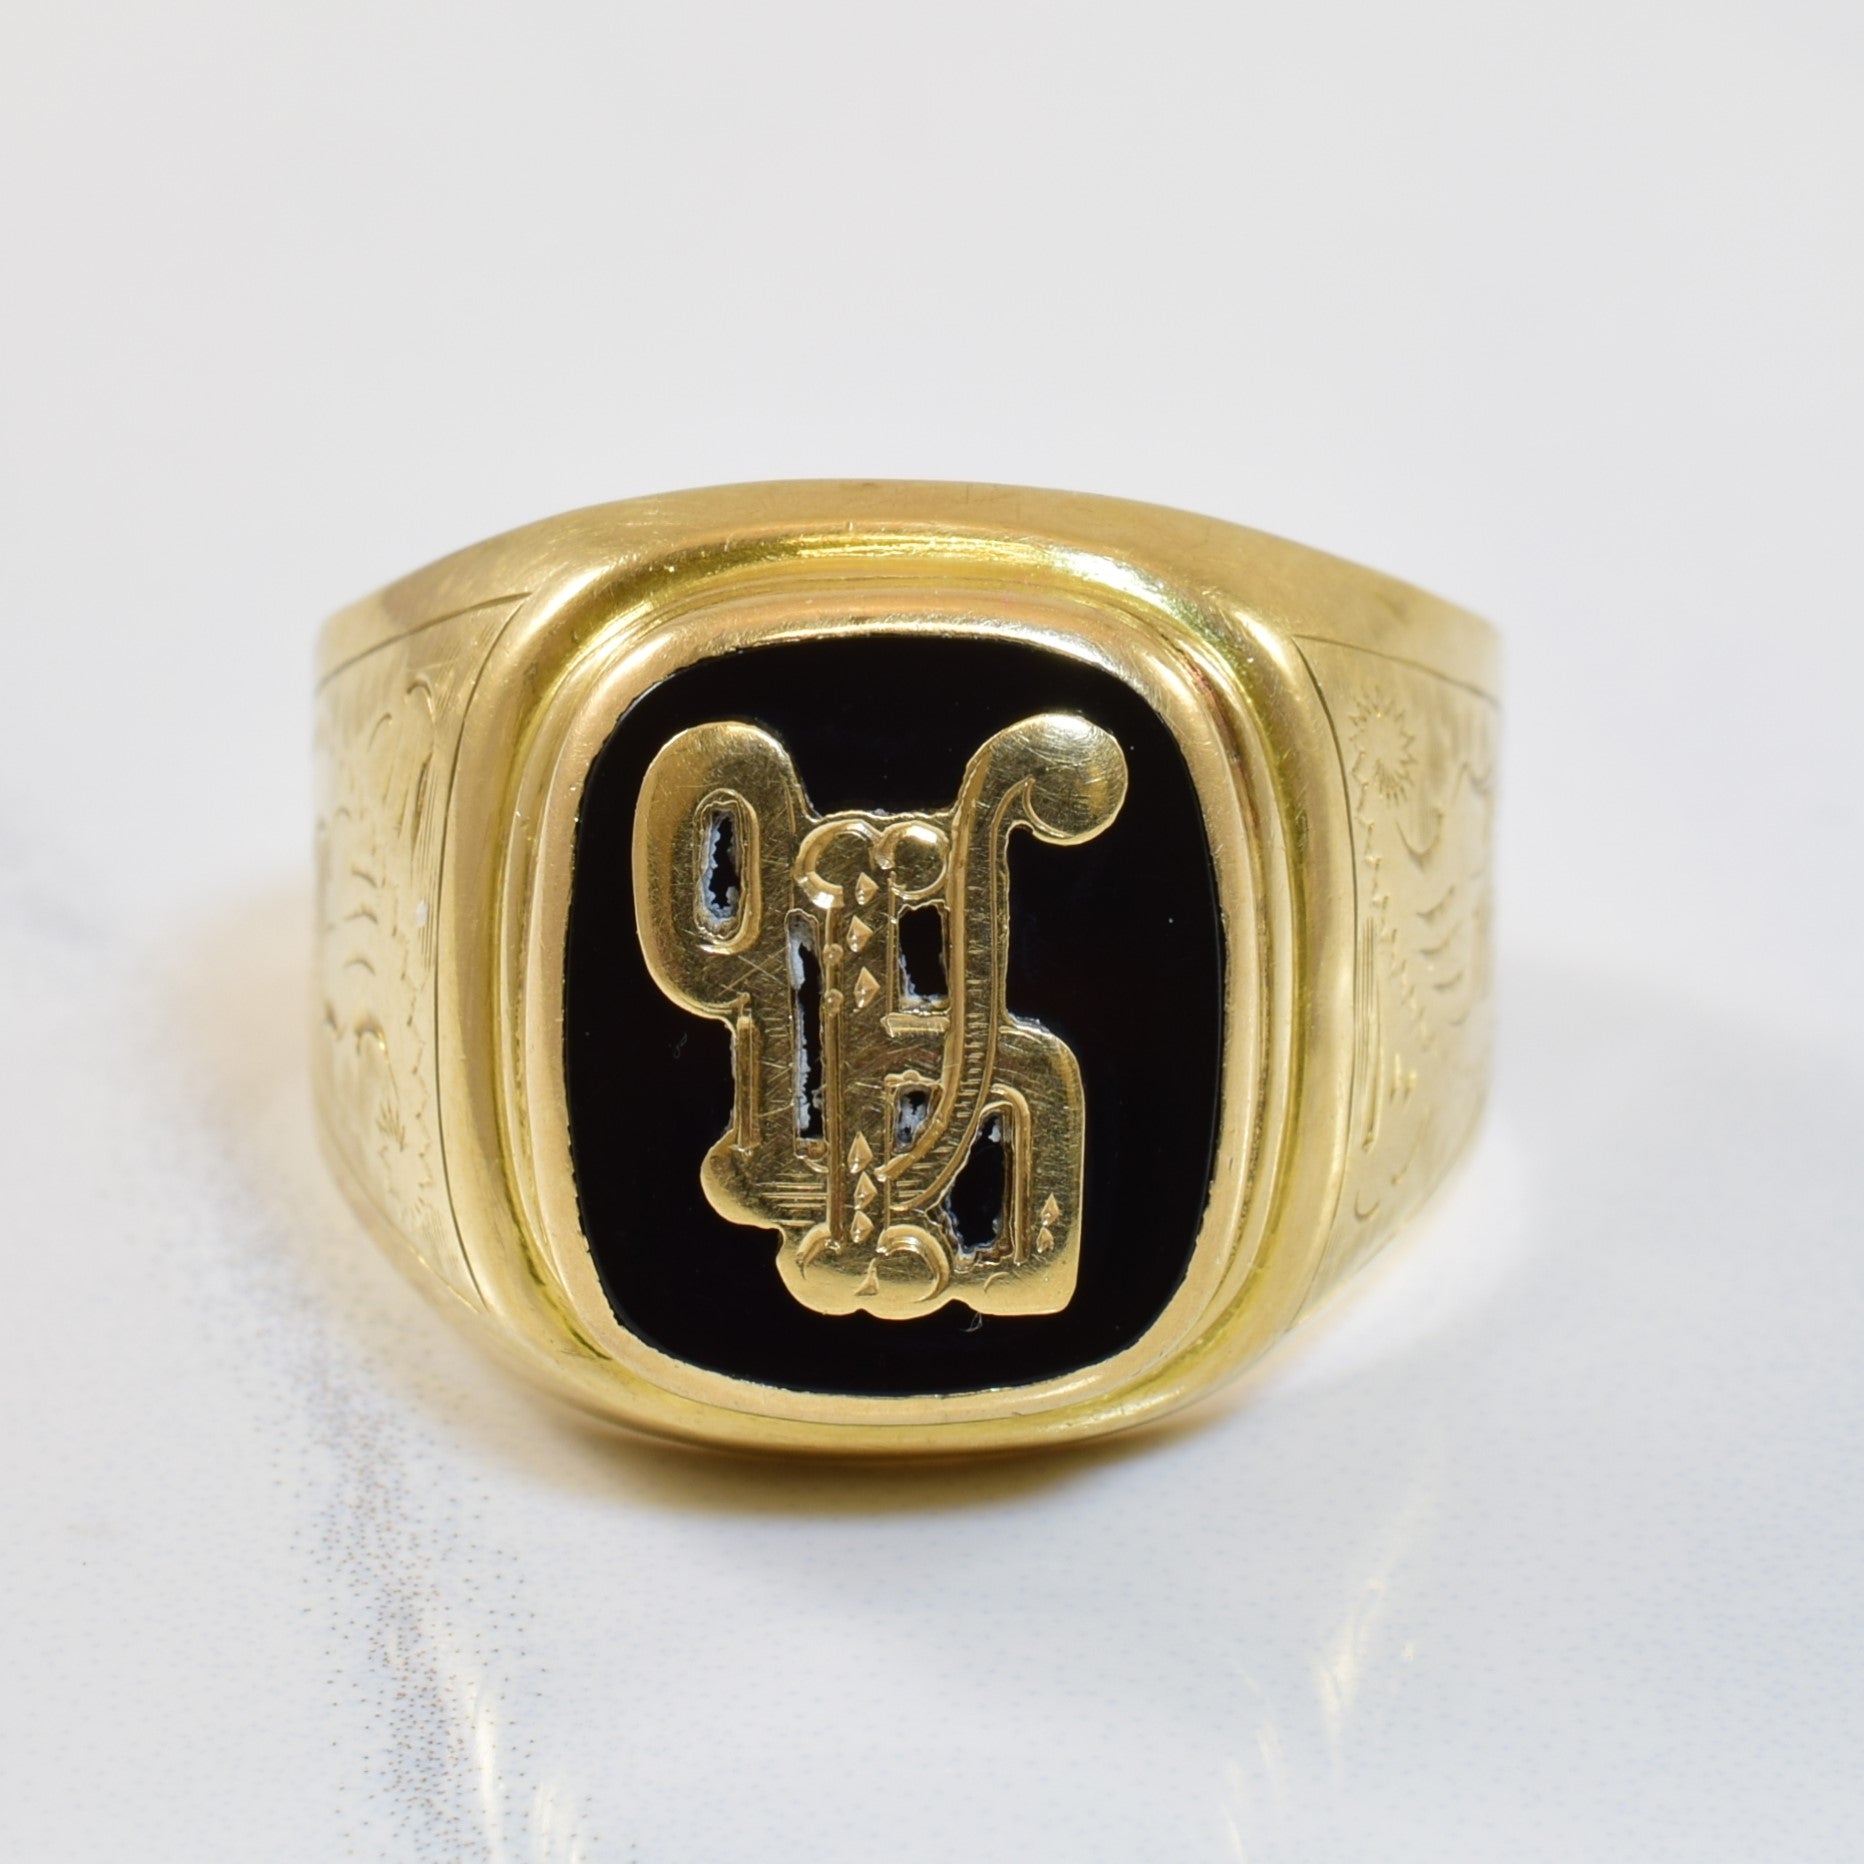 Initial 'WH' Onyx Signet Ring | 4.00ct | SZ 11.5 |